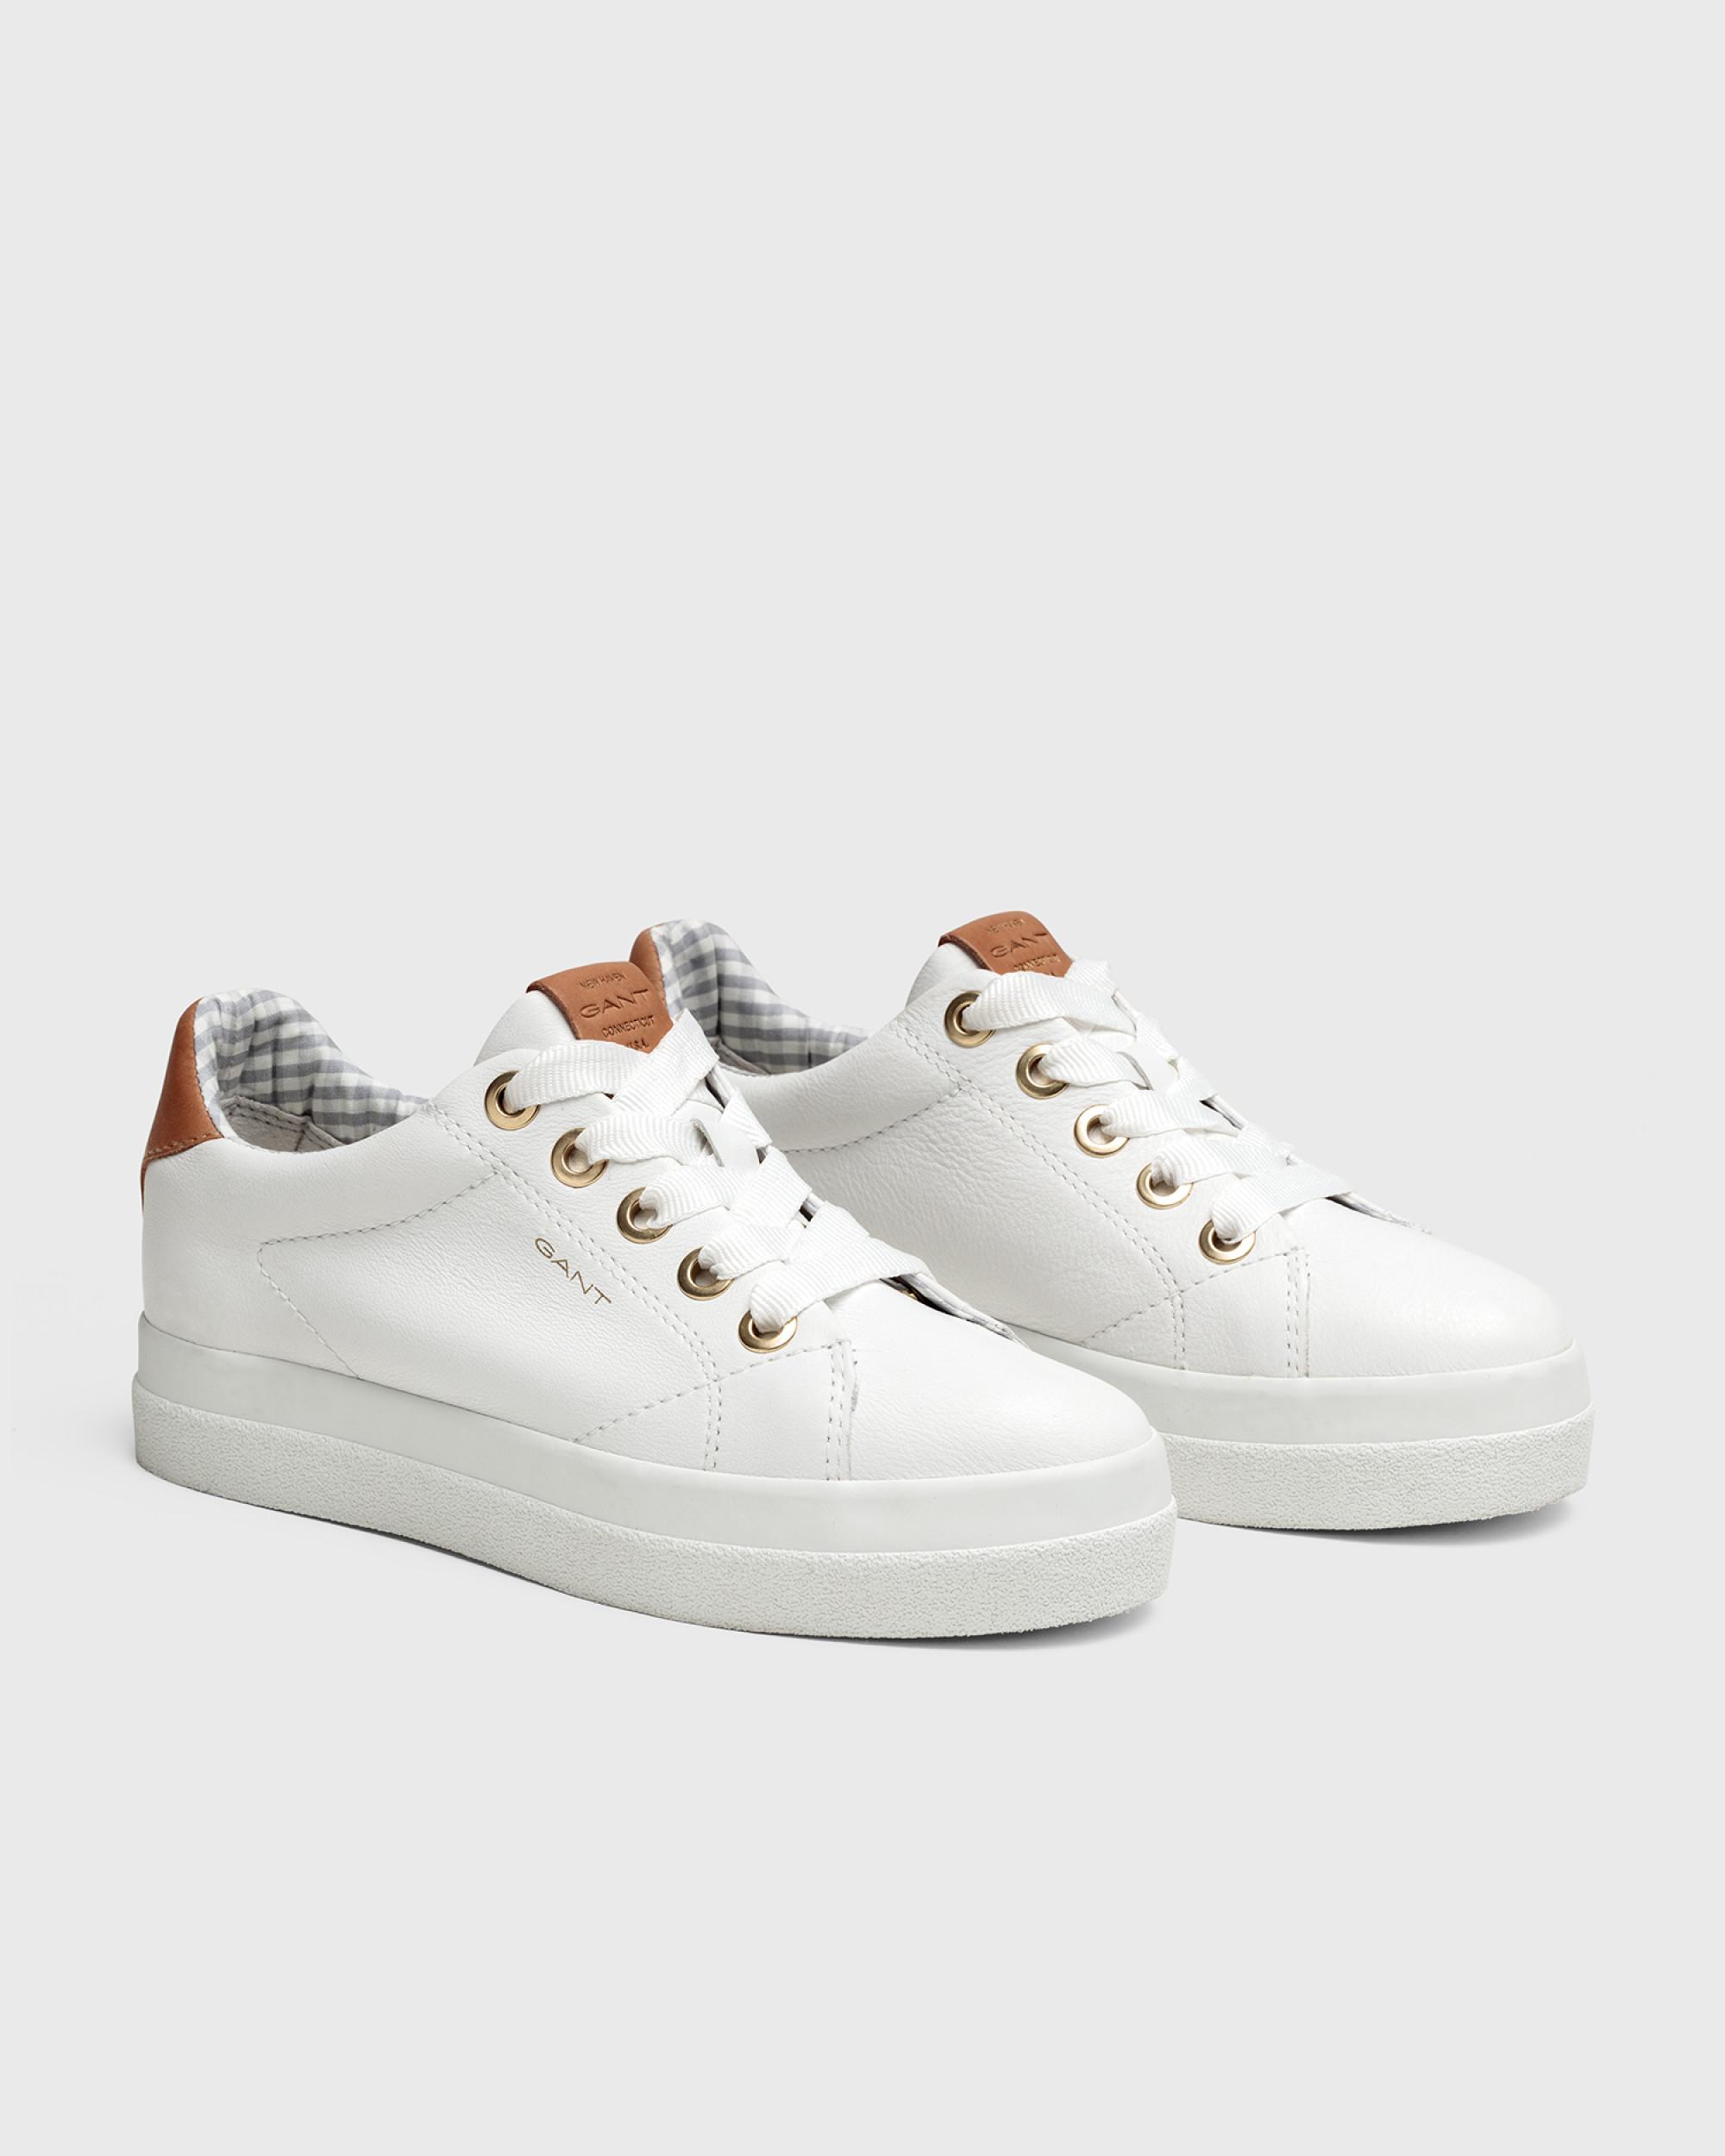 Gant Aurora Low Lace Sneakers Top Sellers, UP TO 60% OFF |  www.acusticaintegral.com